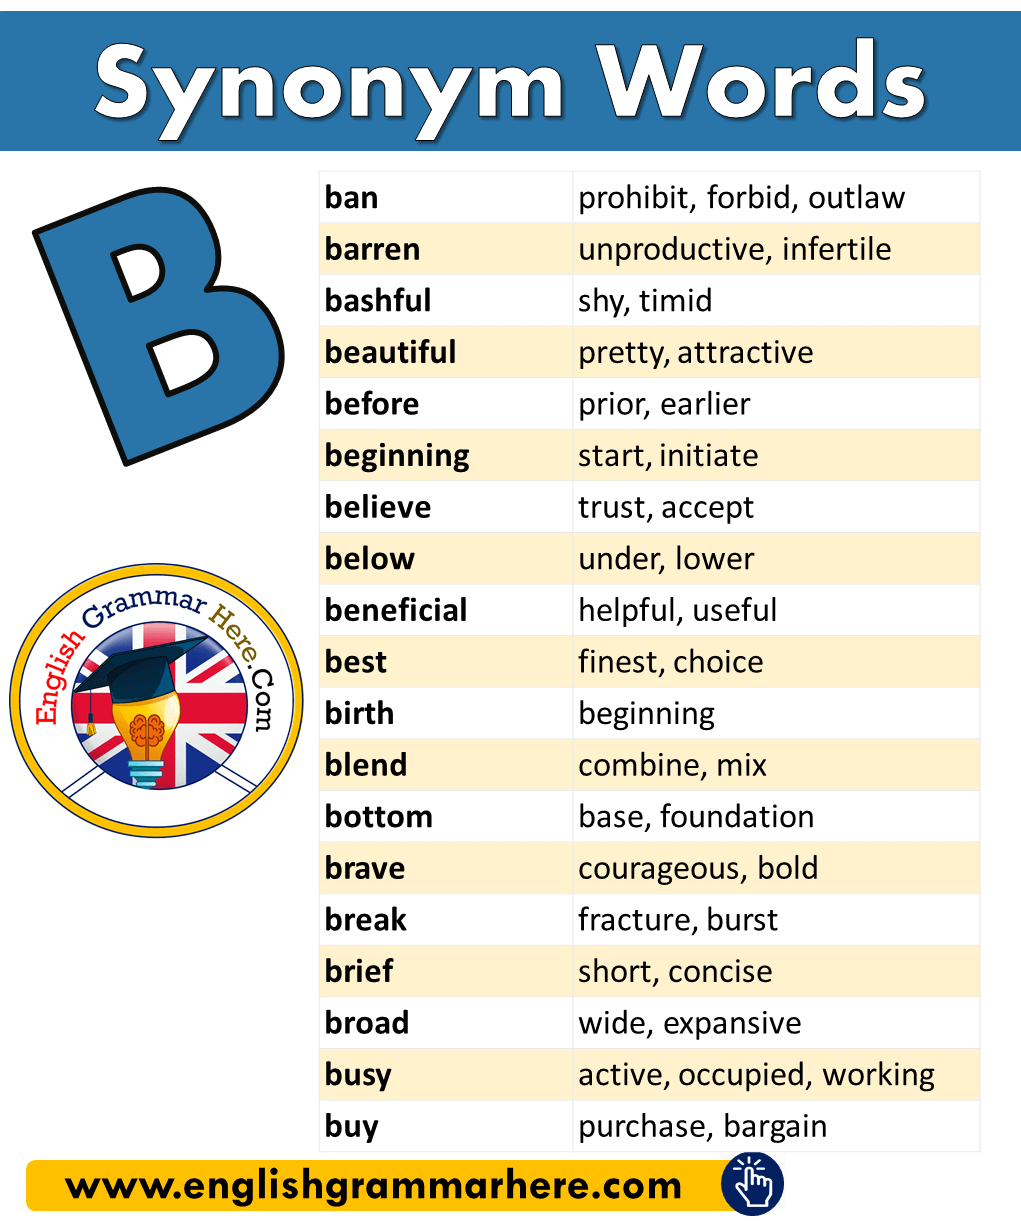 Synonym Words Start With P in English   English Grammar Here